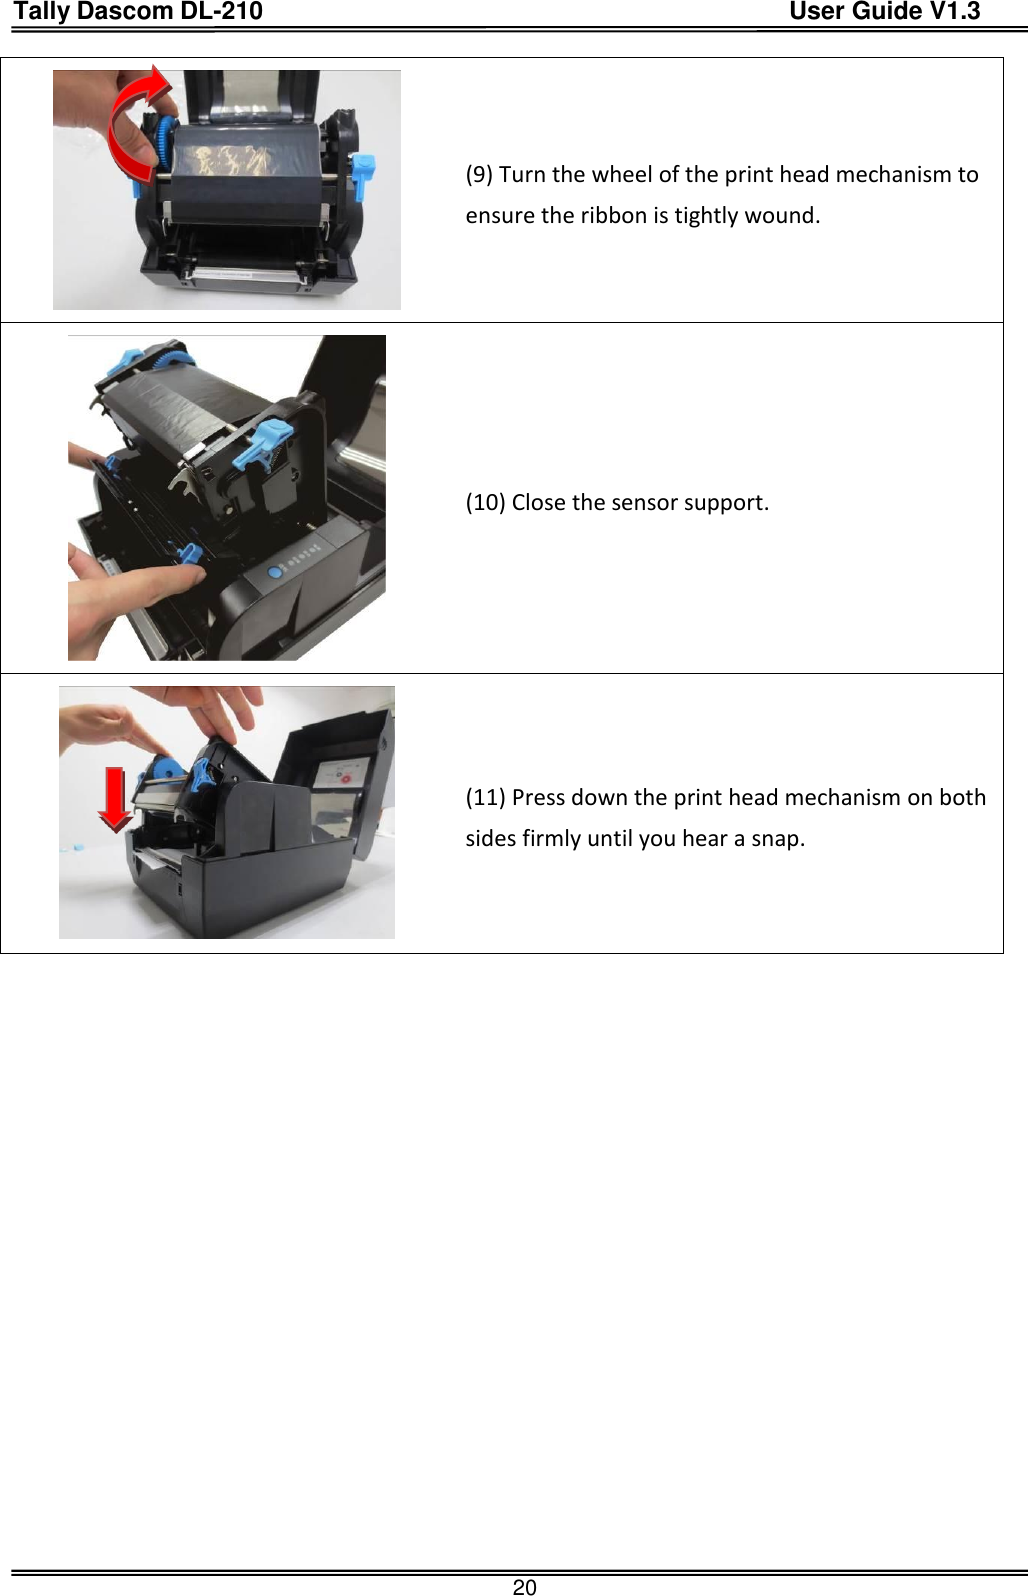 Tally Dascom DL-210                                          User Guide V1.3  20  (9) Turn the wheel of the print head mechanism to ensure the ribbon is tightly wound.  (10) Close the sensor support.  (11) Press down the print head mechanism on both sides firmly until you hear a snap.   